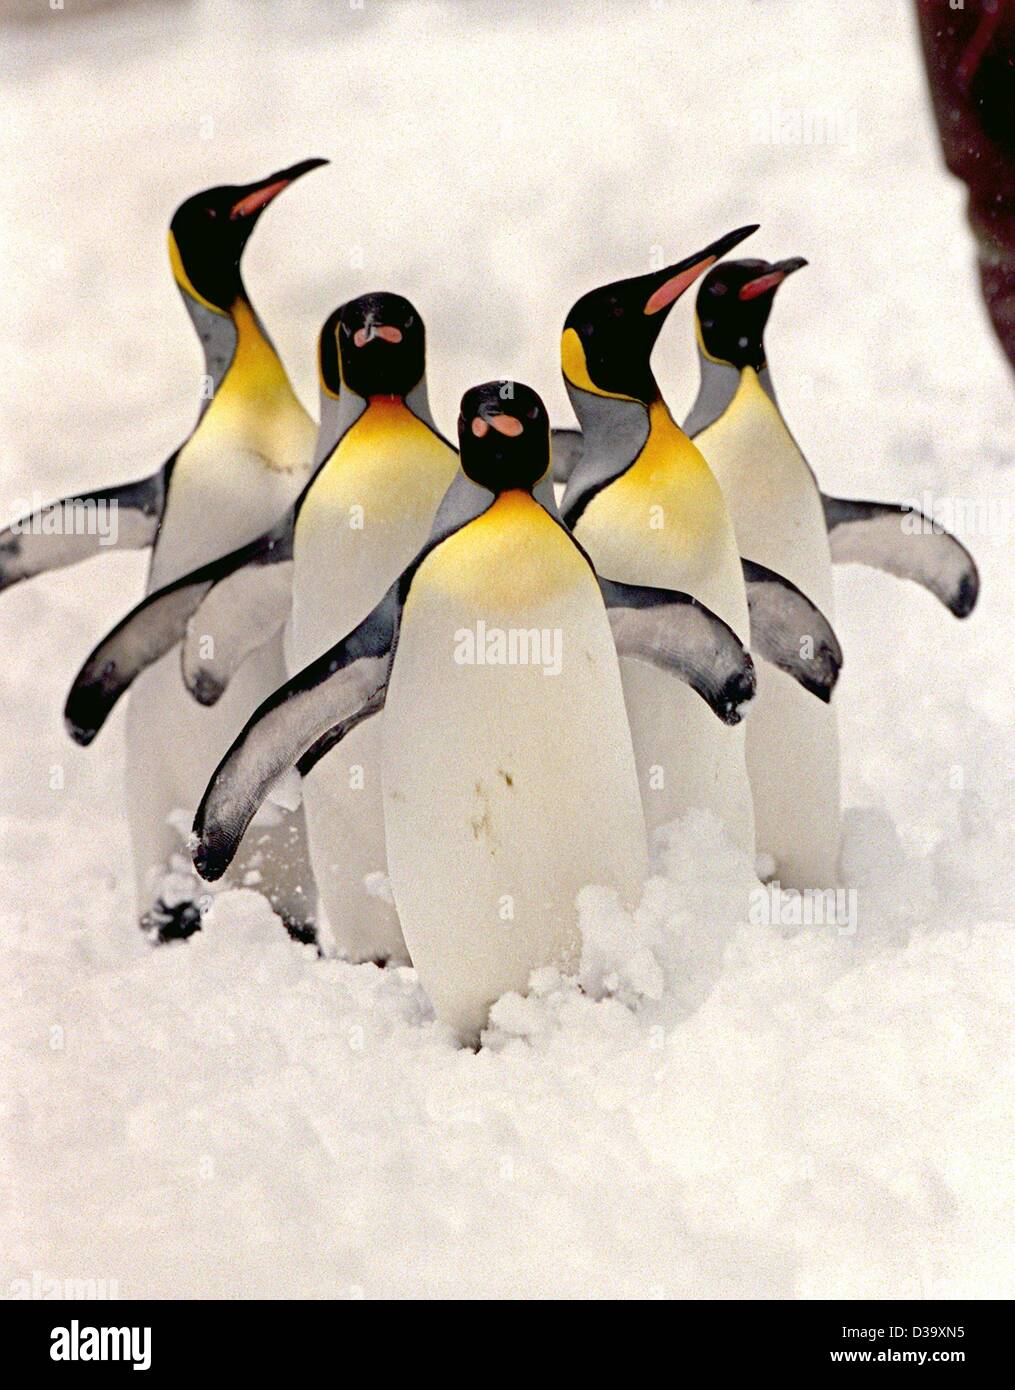 (dpa) - Five king penguins enjoy the snow in Munich's zoo Hellabrunn on 23.11.1999. The colder winter gets in Germany the more they feel right at home. Stock Photo